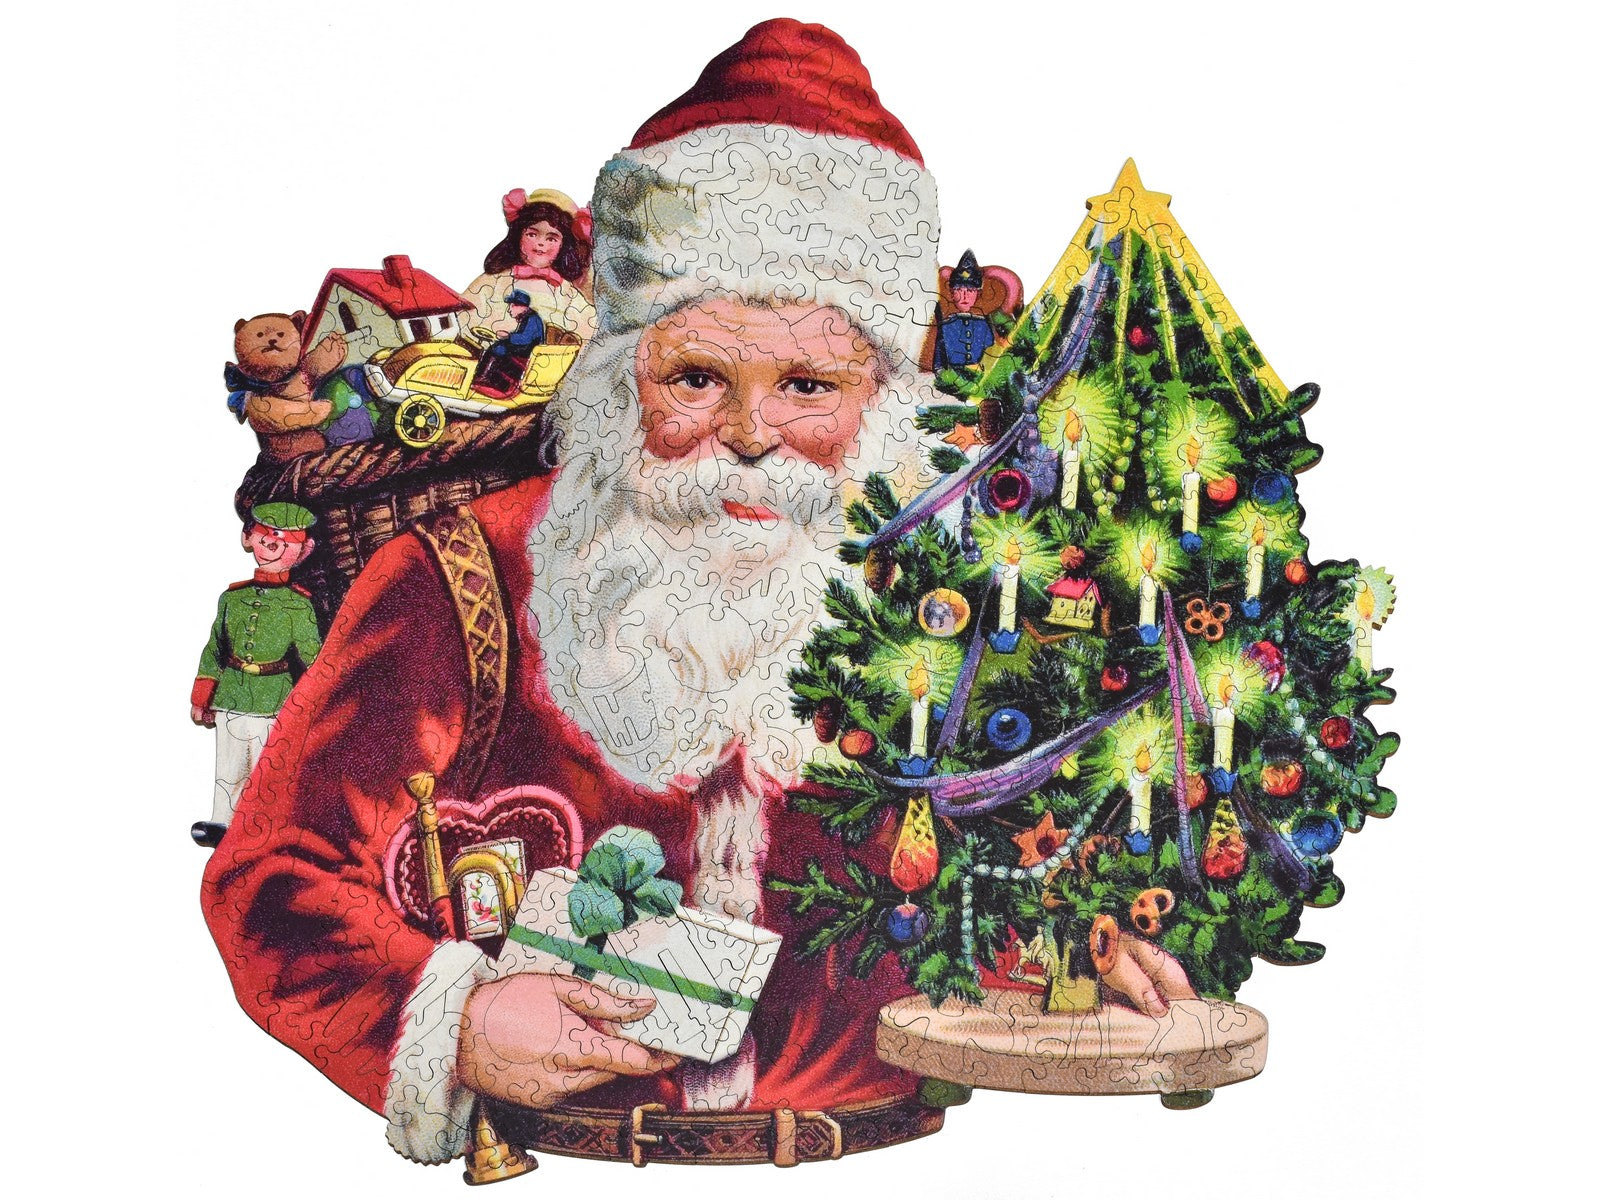 The front of the puzzle Toys a Plenty, showing Santa with an armful of toys.